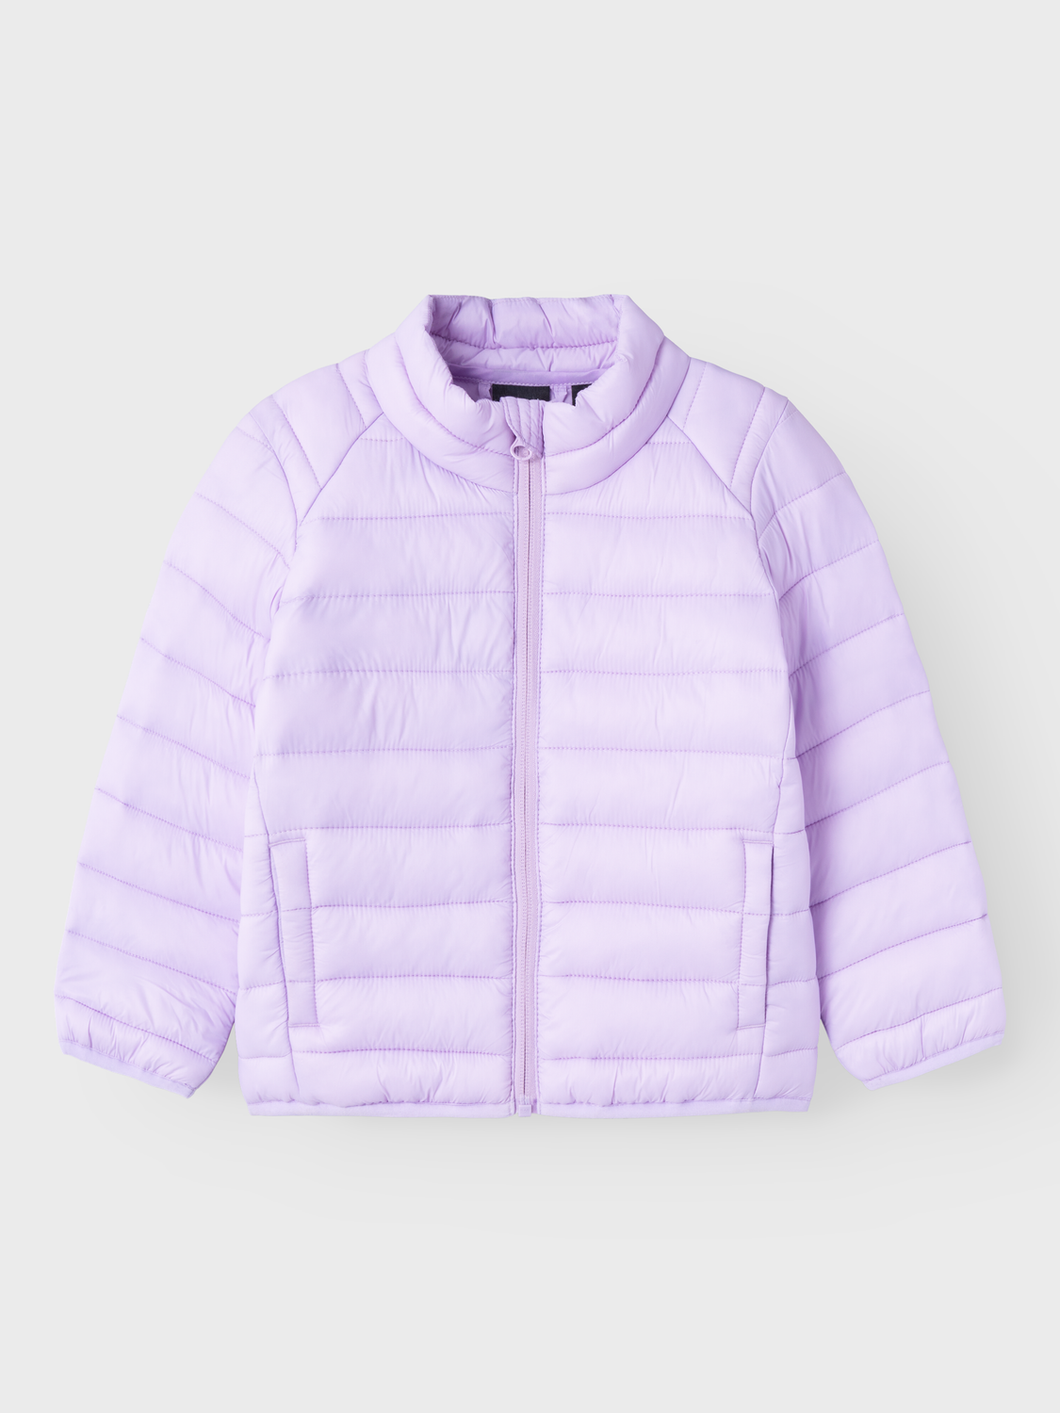 NMNMEMORY Outerwear - Orchid Bloom